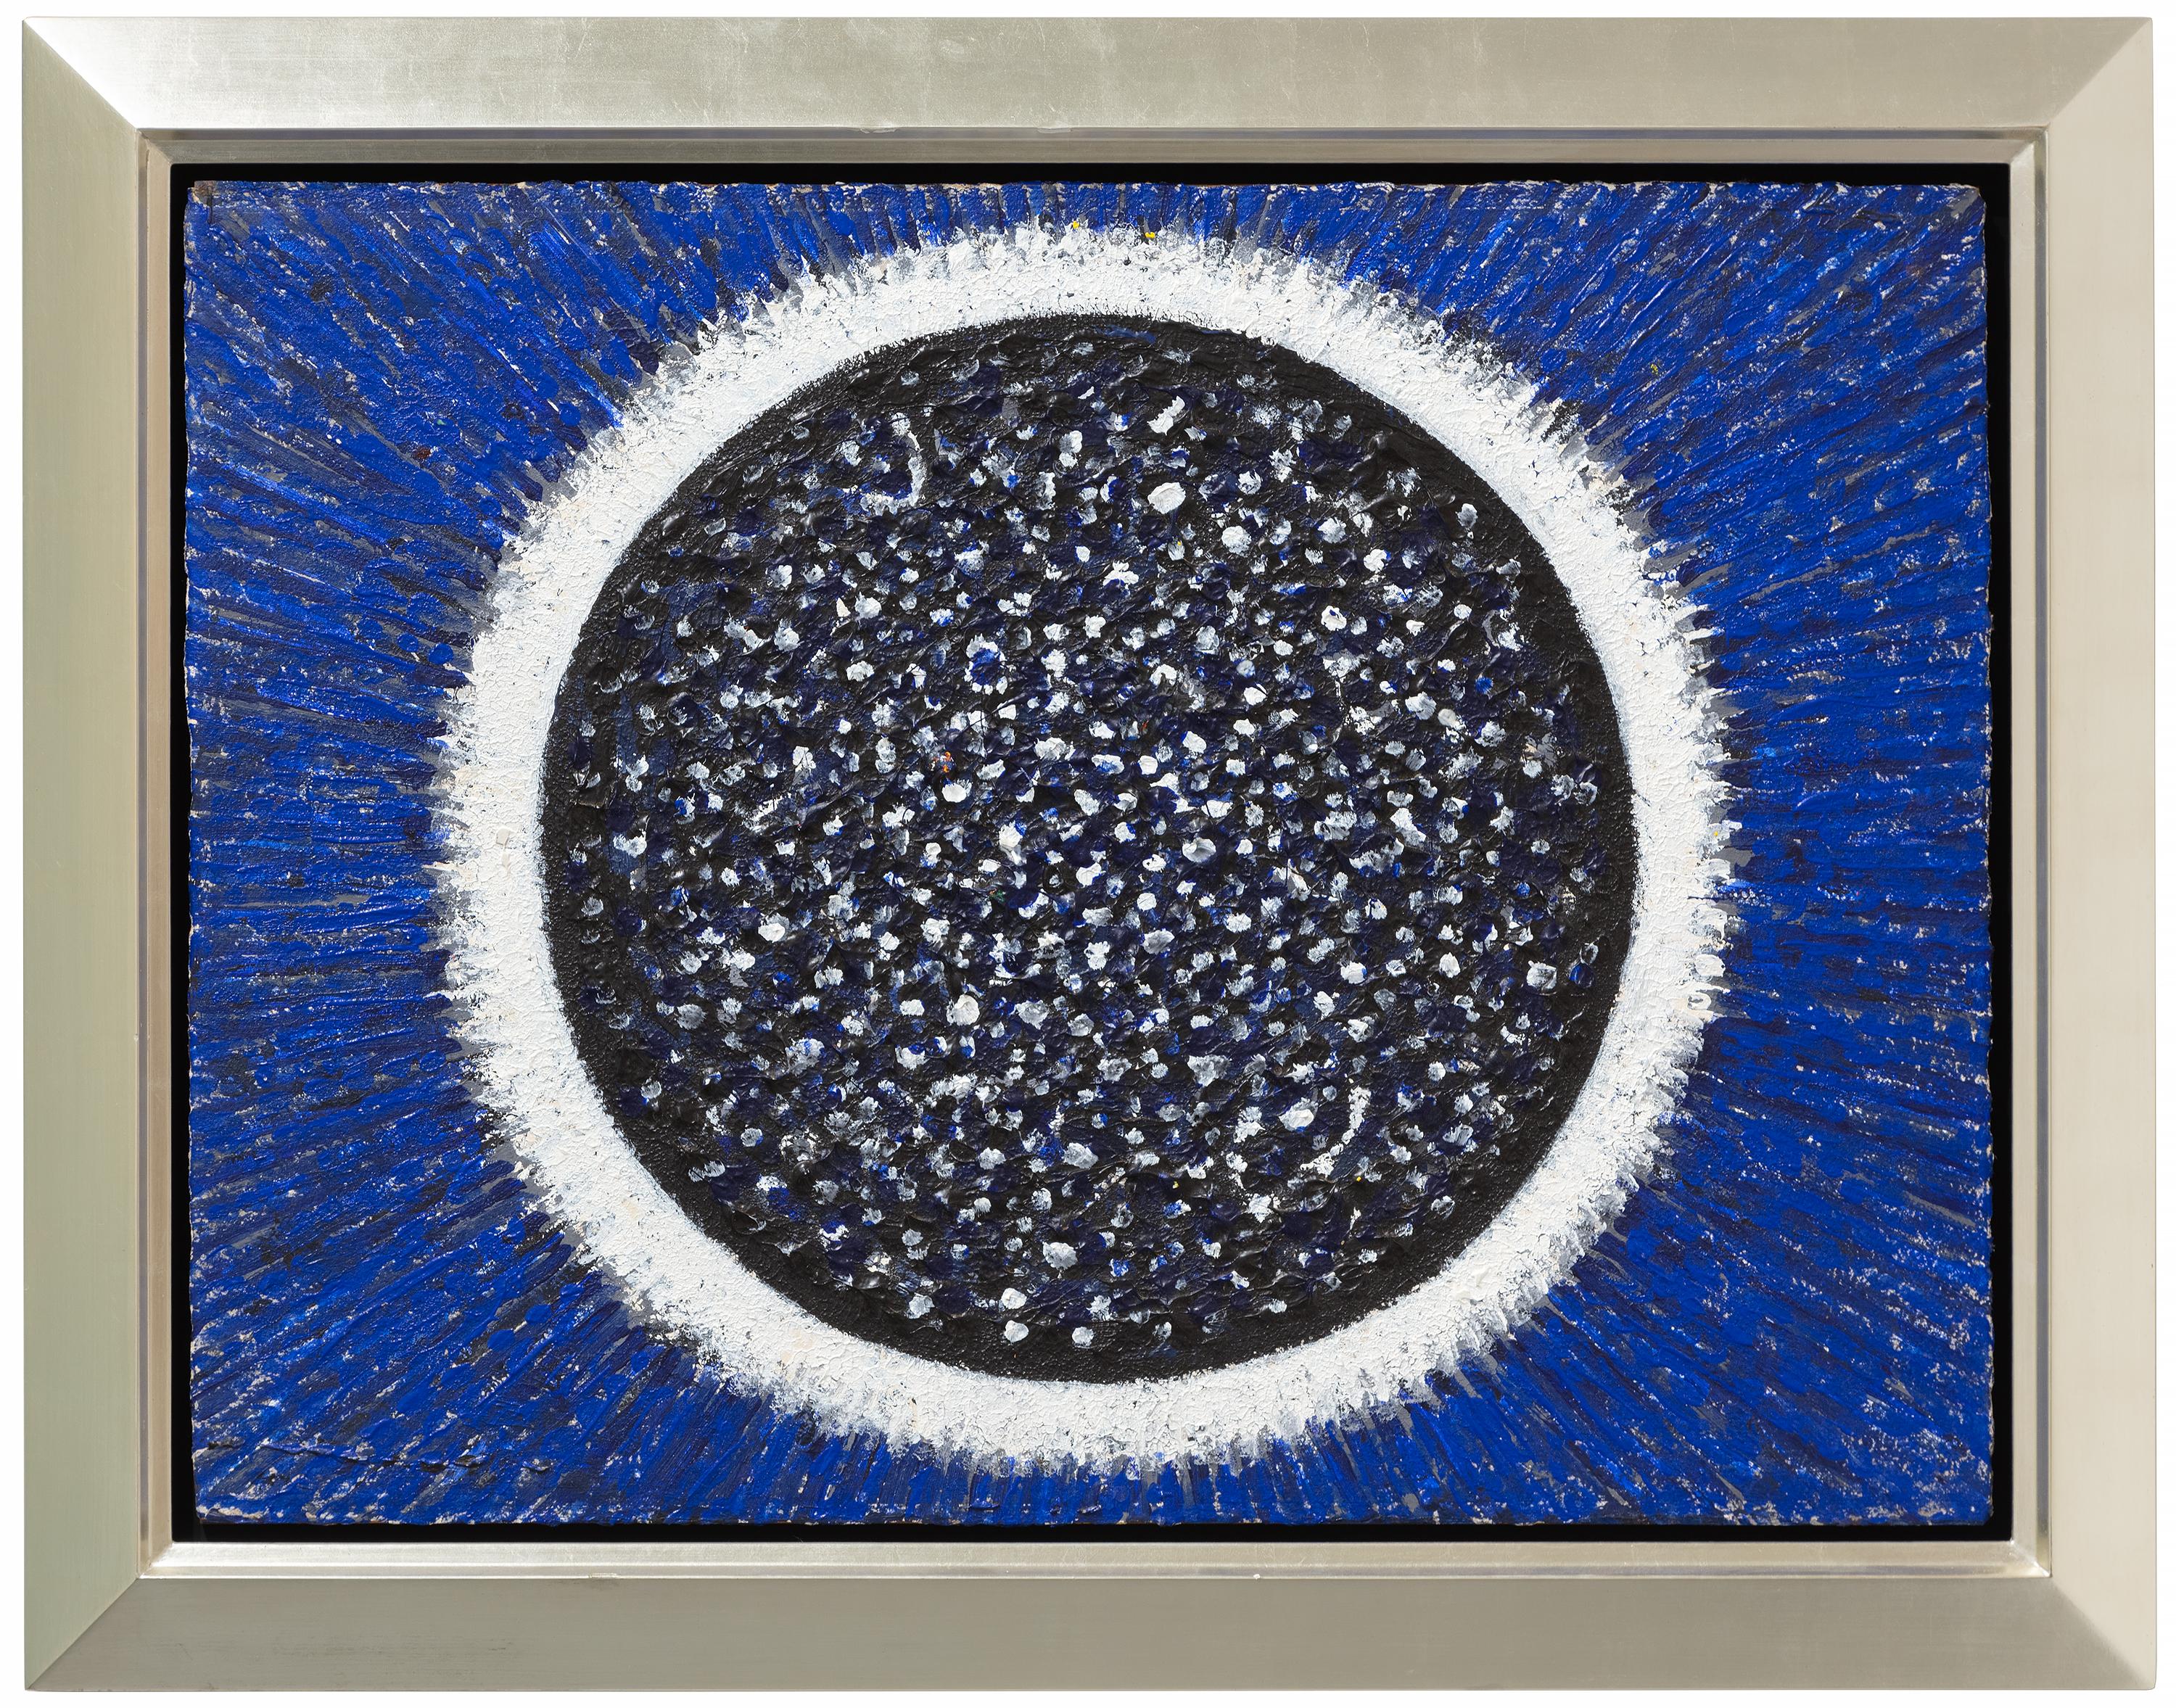 Untitled, (Black Circle, Space) - Painting by Richard Pousette-Dart